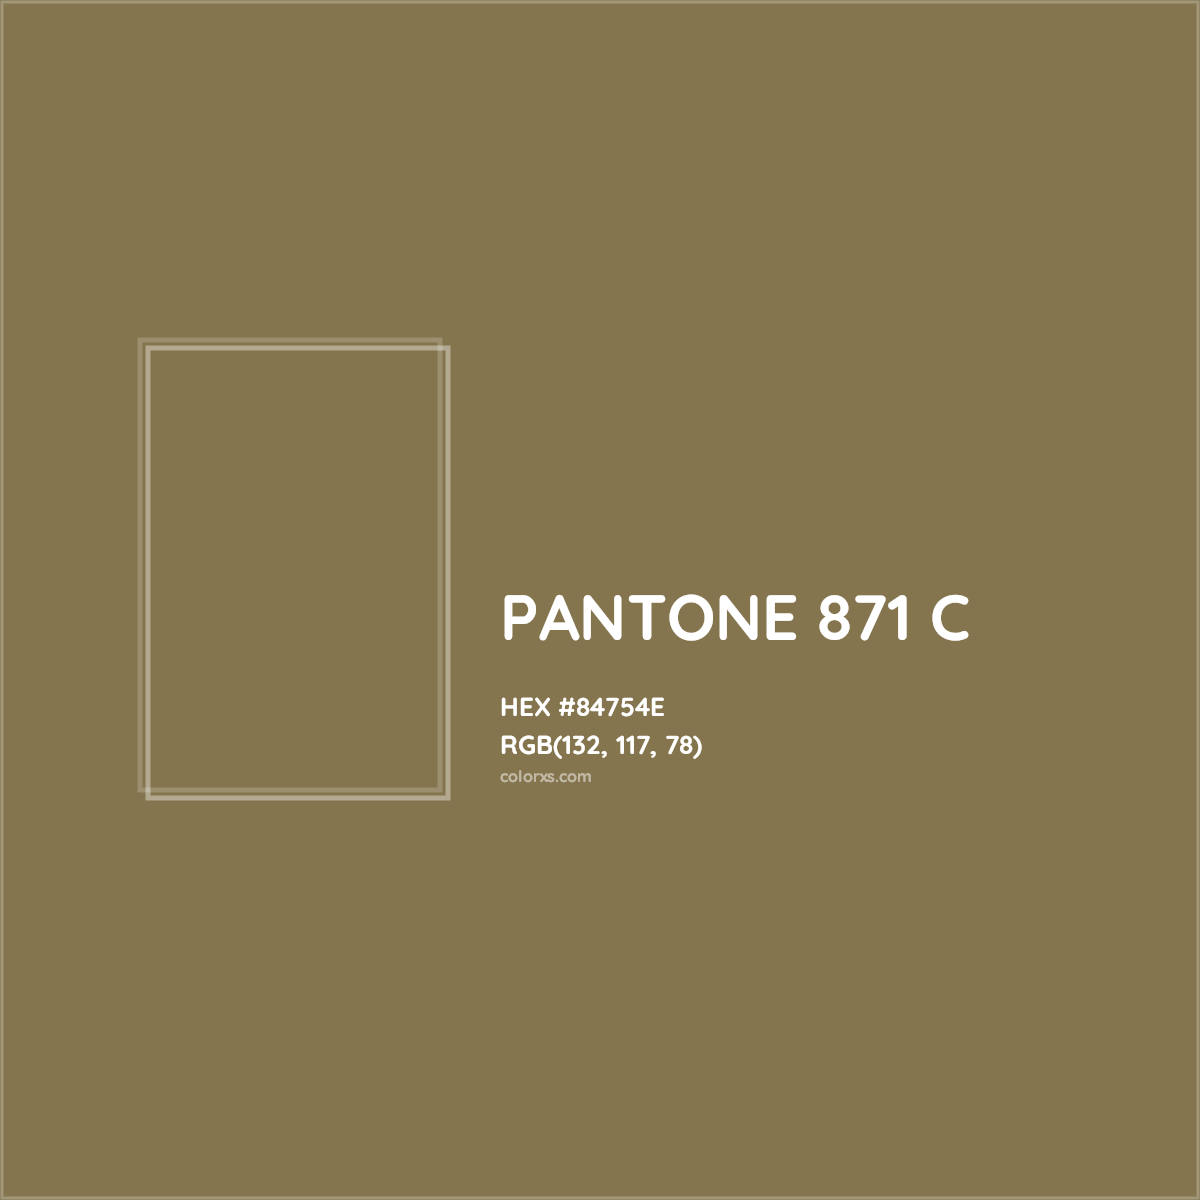 Pantone 871 C Complementary Or Opposite Color Name And Code 84754e